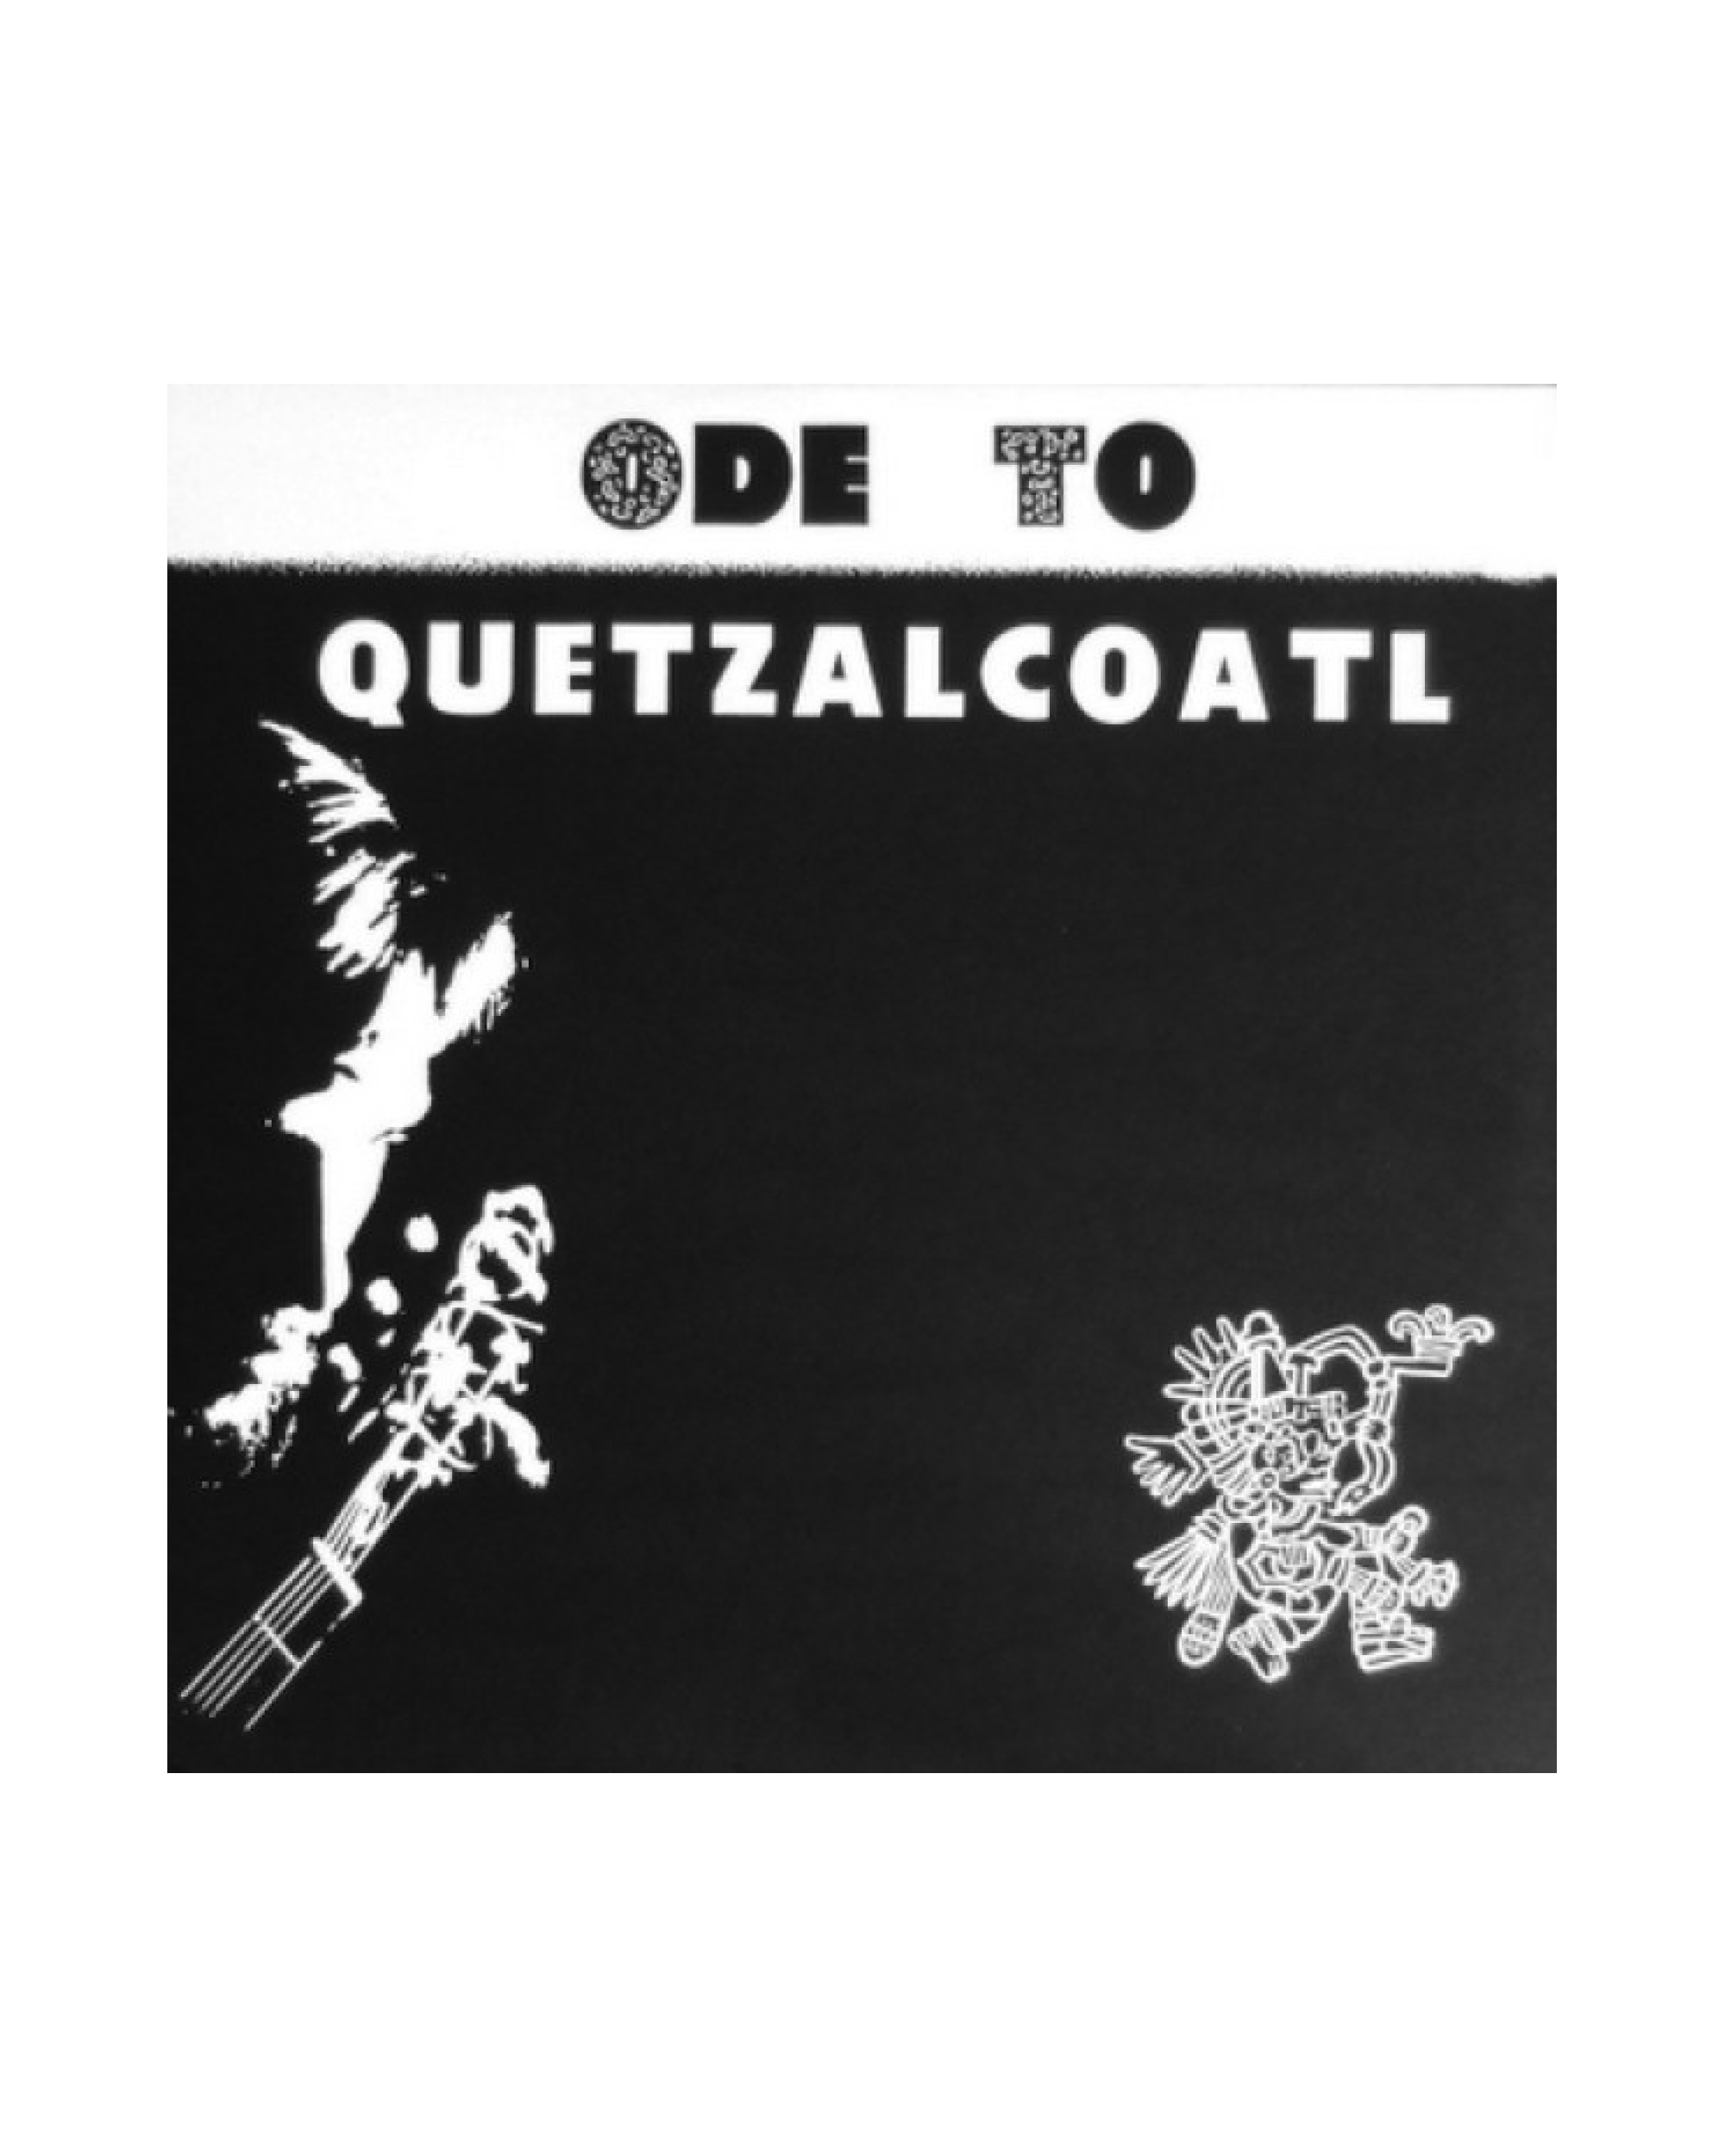 The first of Bixby’s solo albums, Ode to Quetzacoatl, was privately released in 1969. Only a thousand copies of the record were originally pressed.